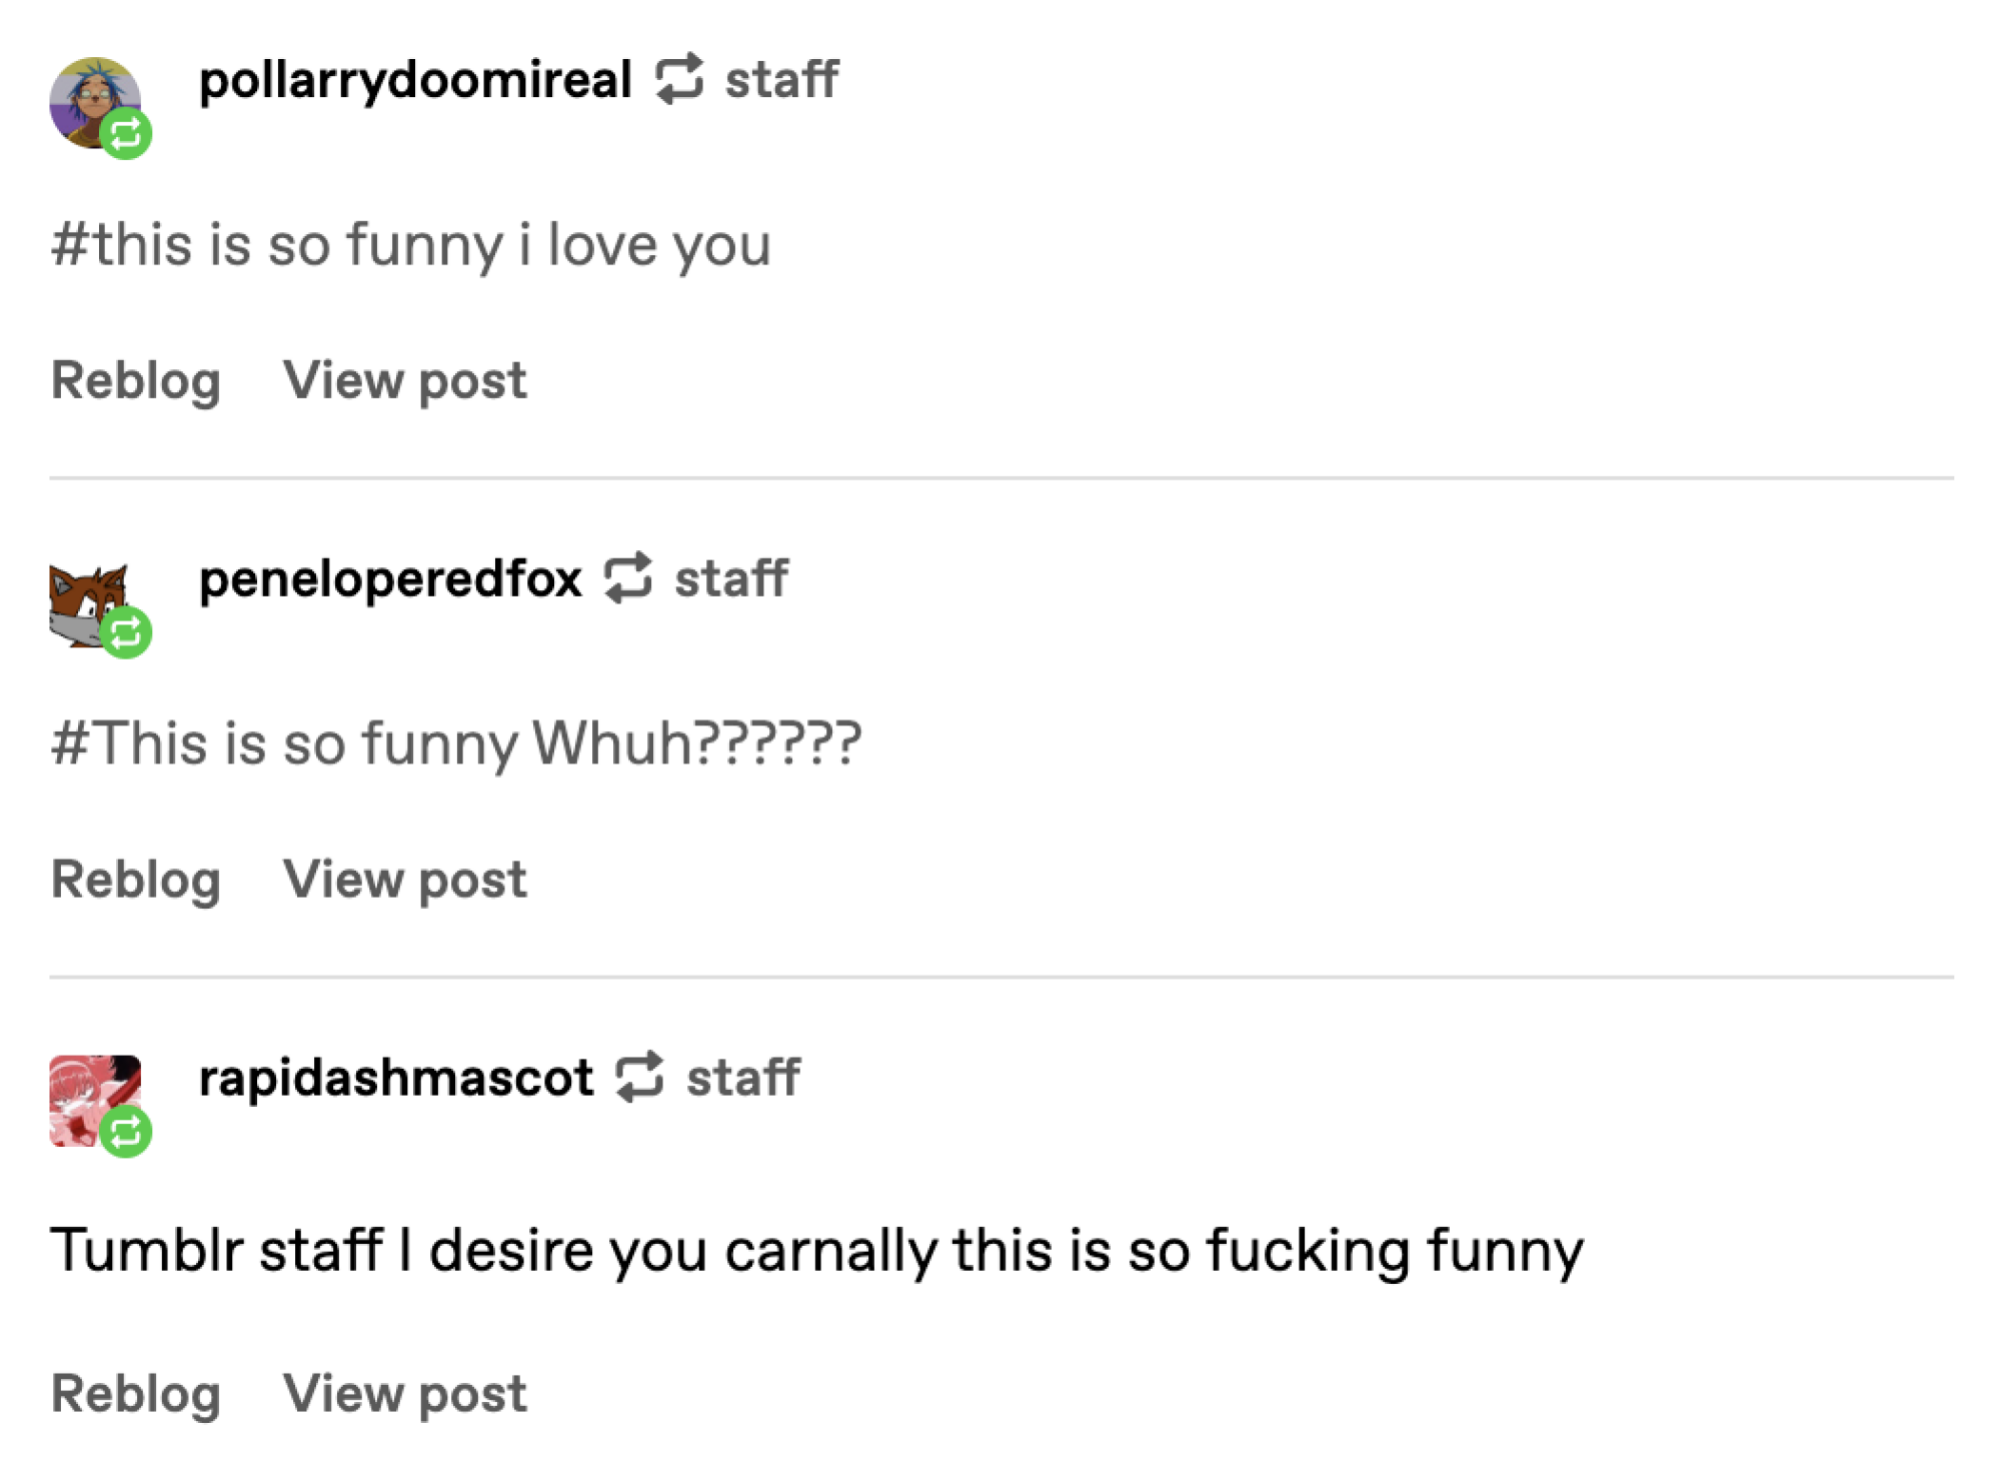 Comments underneath Tumblr's staff post.